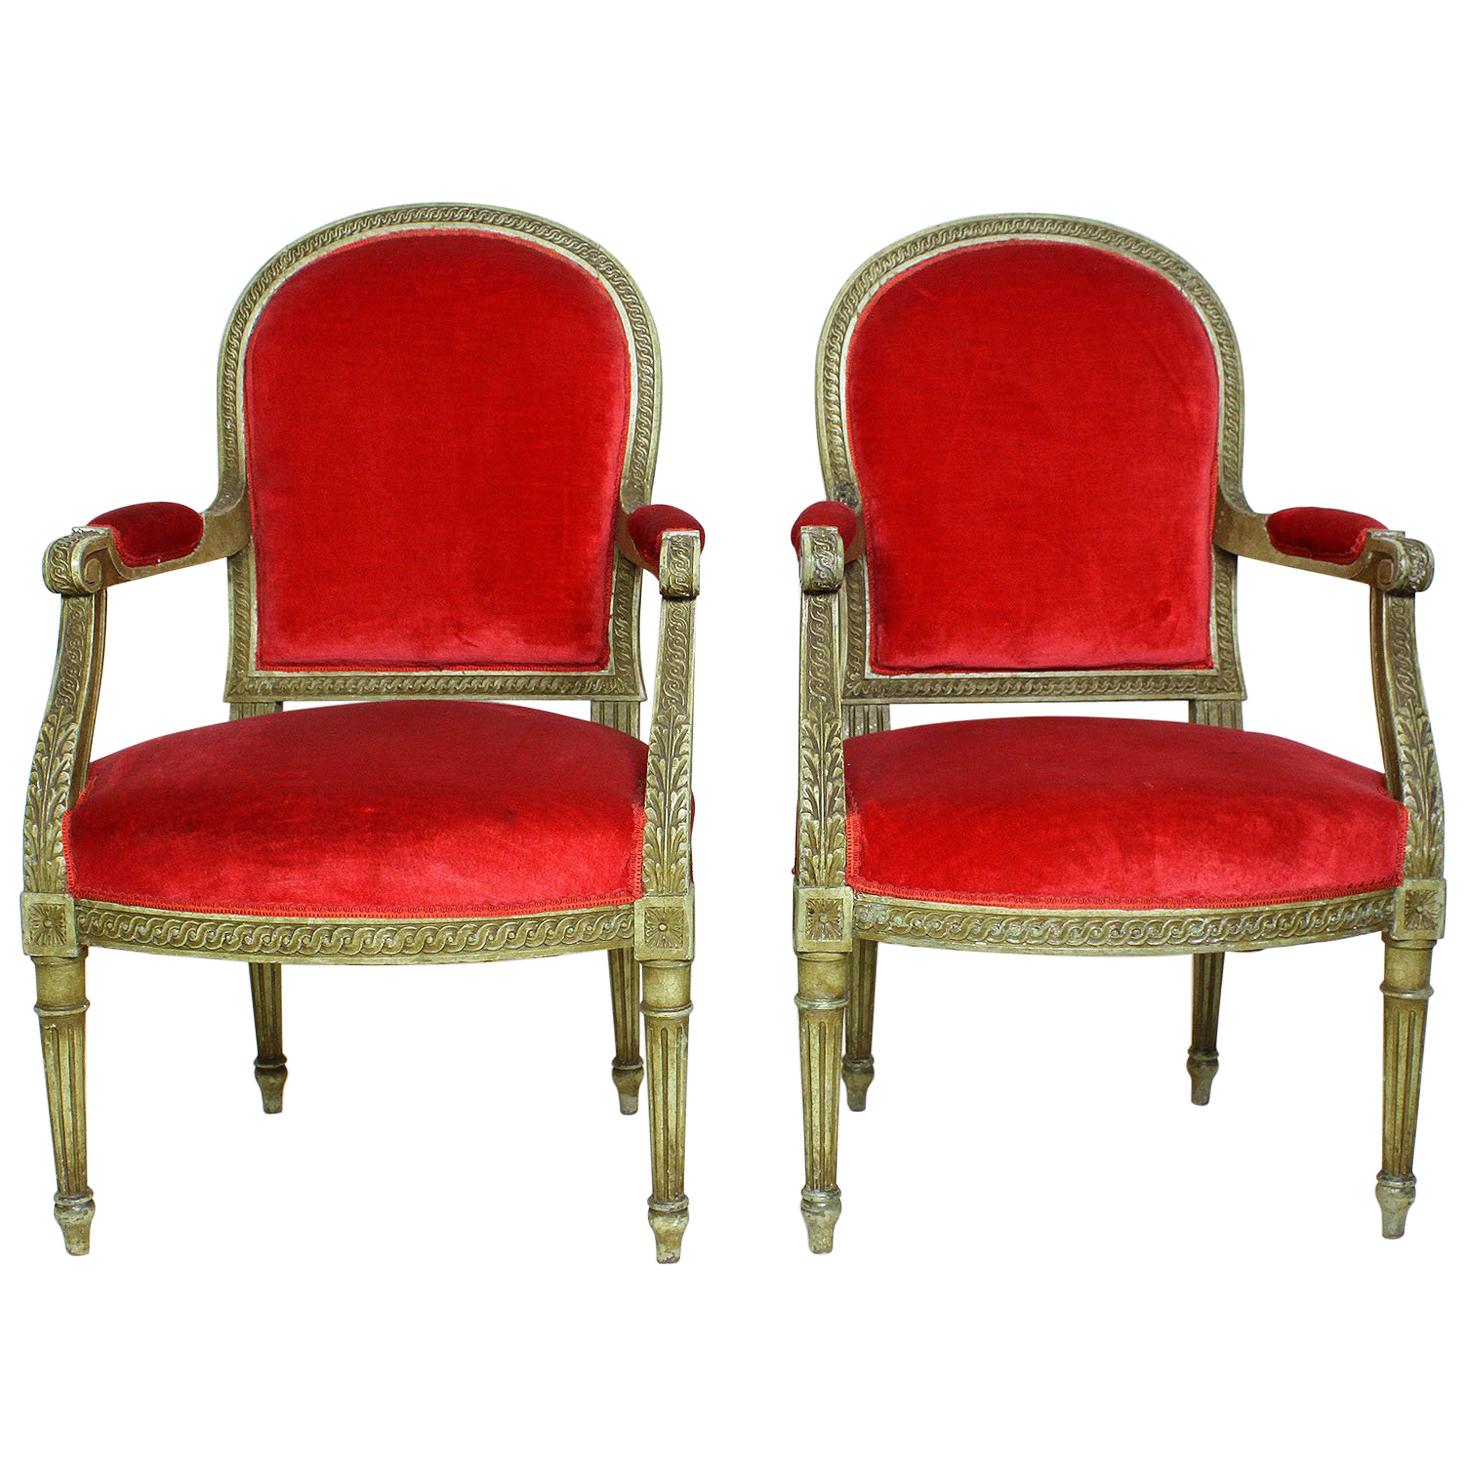 Pair of French Louis XVI Style Giltwood Carved Lacquered Fauteuils Armchairs